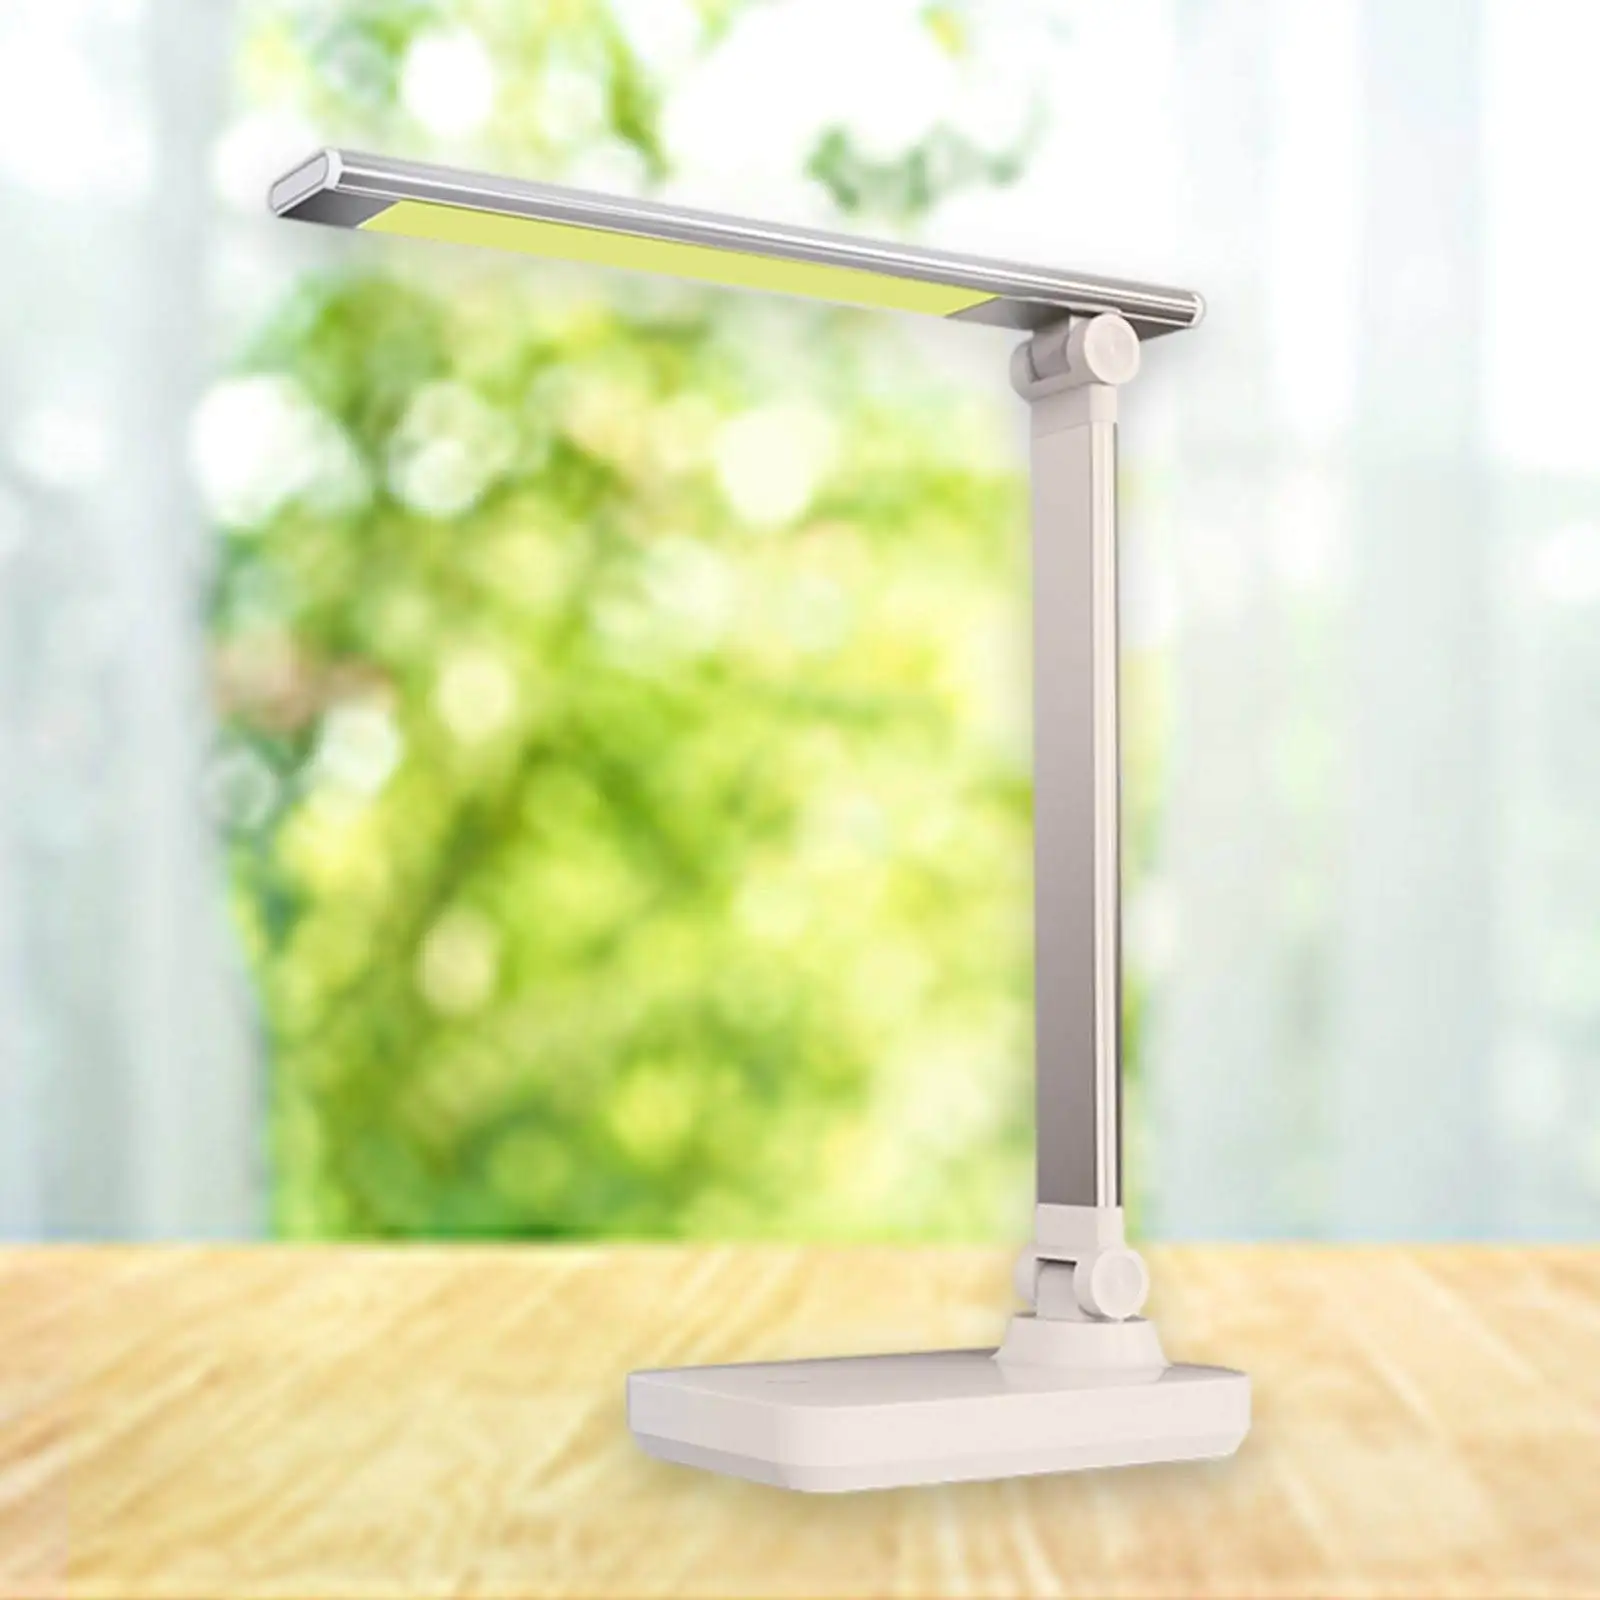 LED Desk Lamp Eye-Caring Dimmable Touch Control Soft Light Three Levels Dimming Warm White Bedside Lamp for Office Computer Work